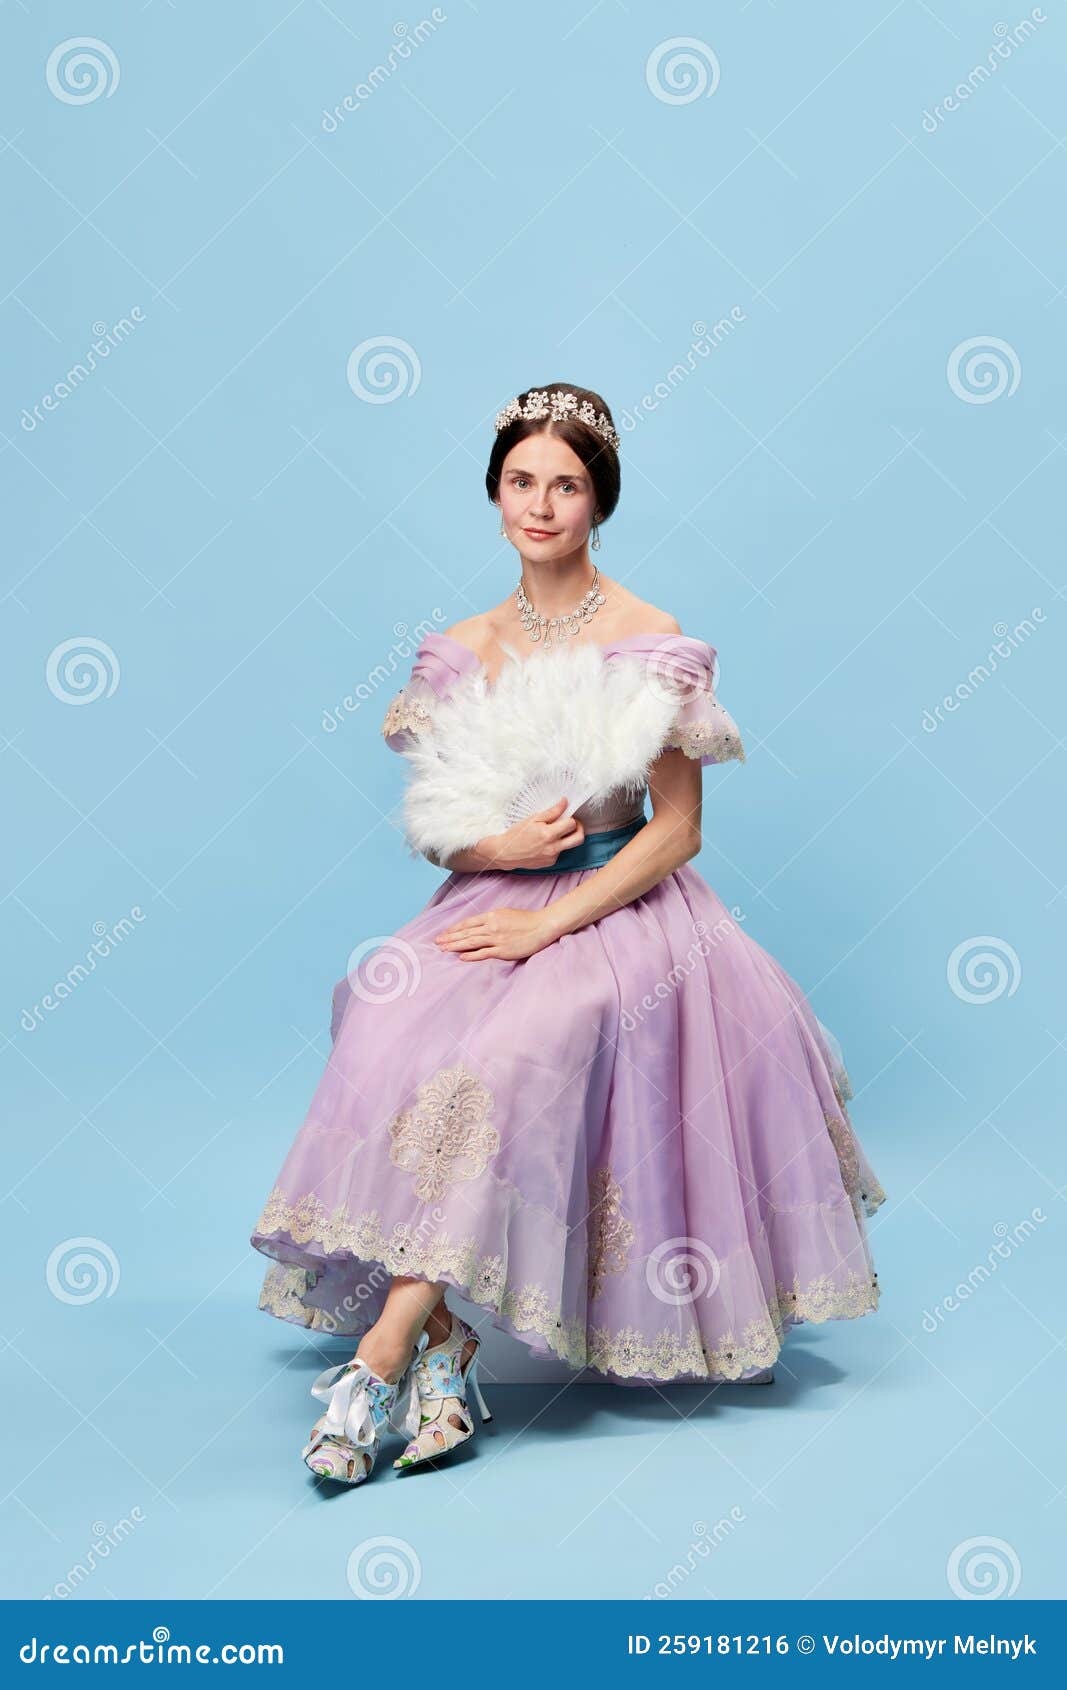 stylishness. beautiful charming girl in lilac color medieval dress as young queen or princess on blue background. eras